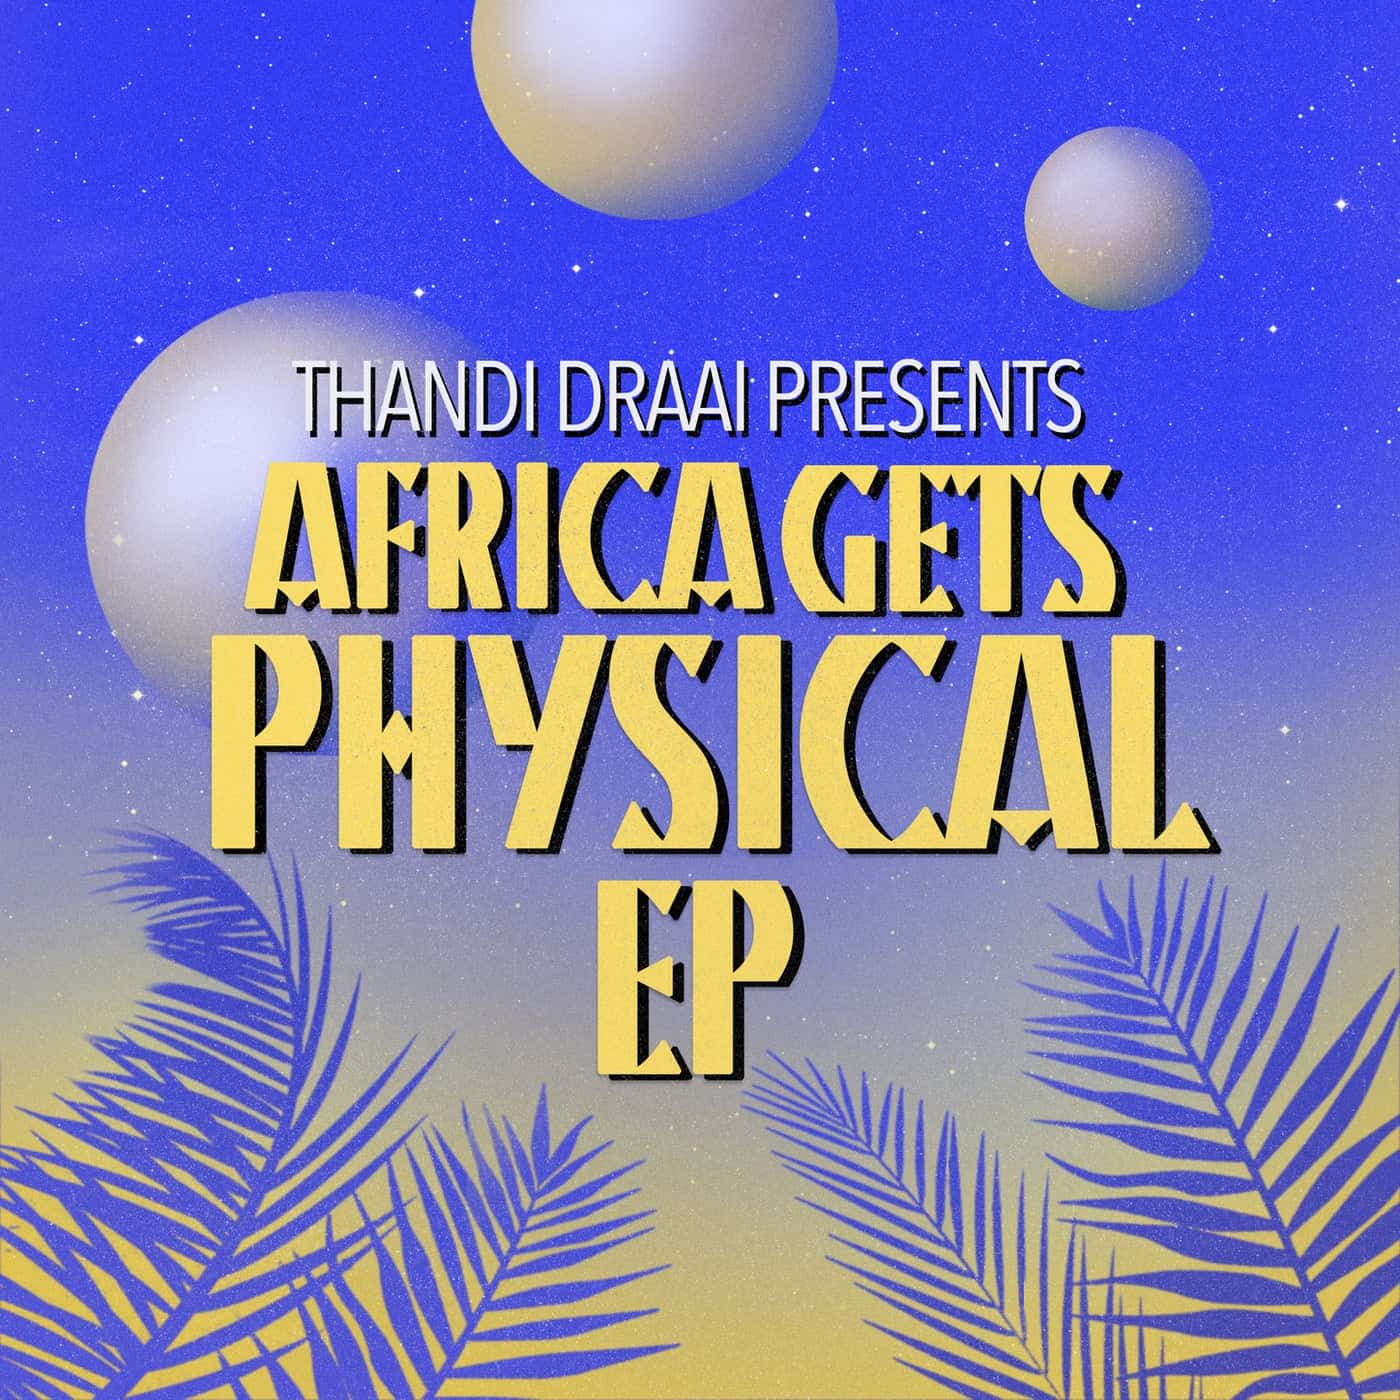 image cover: VA - Africa Gets Physical, Vol. 4 EP / GPM658